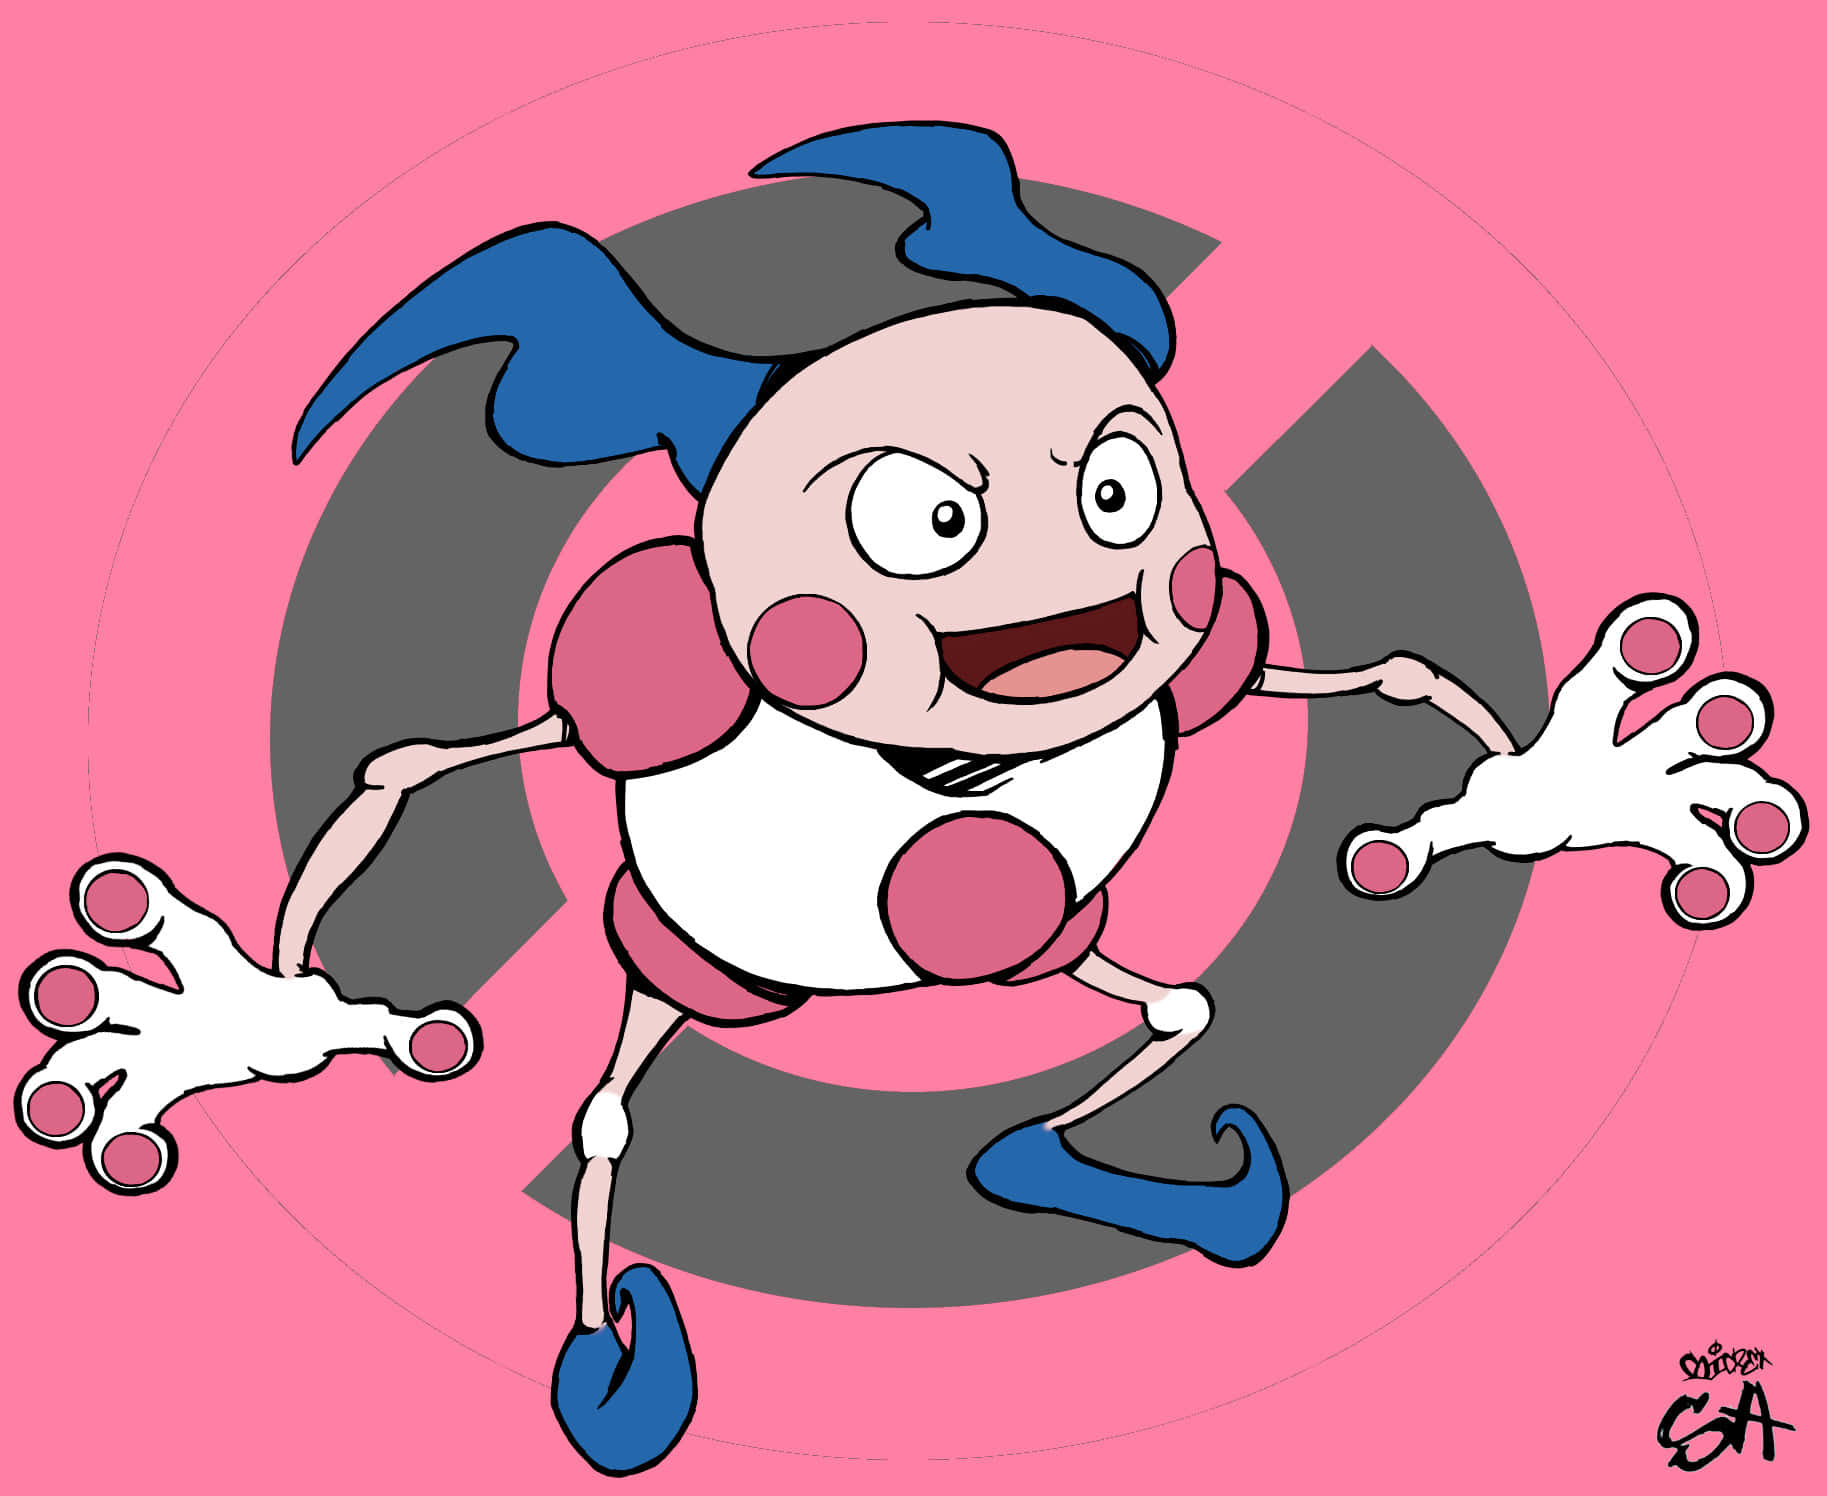 Mr. Mime showing off its magical abilities on a vibrant pink background Wallpaper